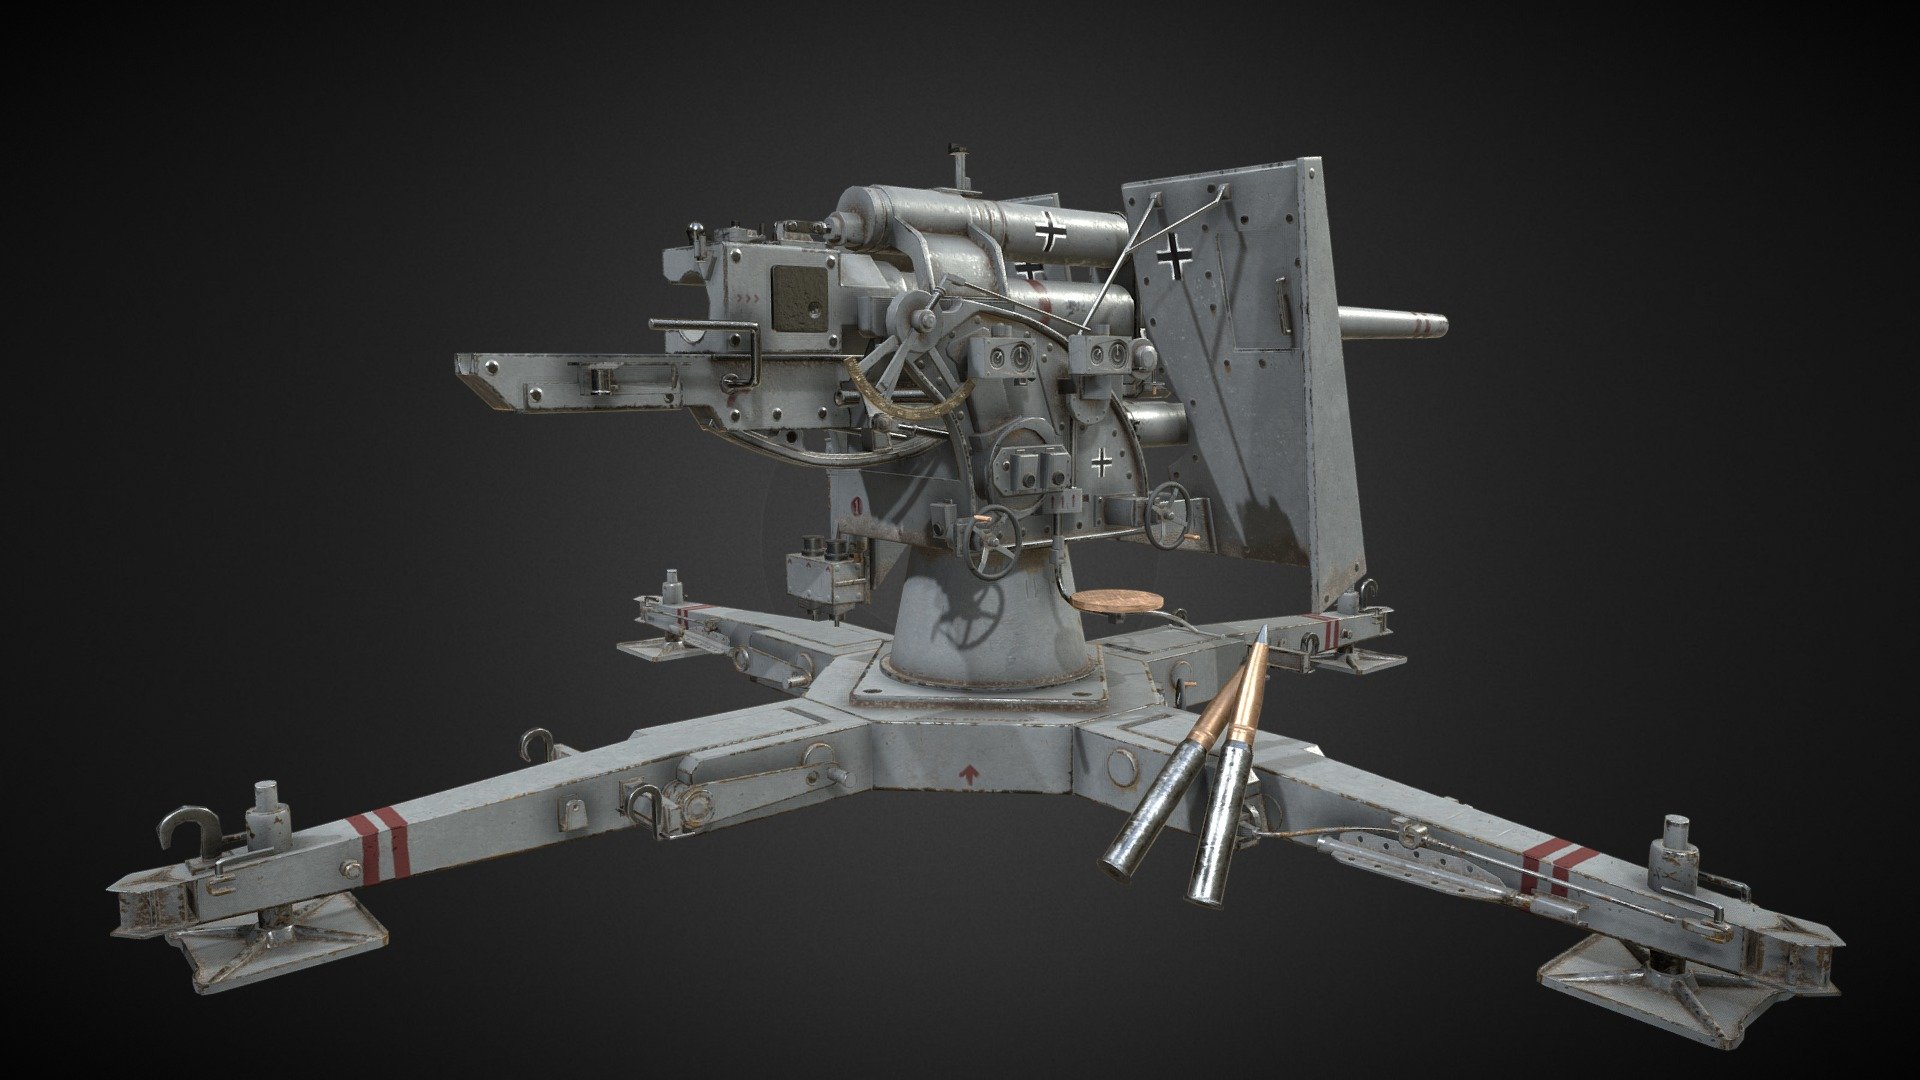 For a personal project i needed to make a Flak cannon, modelling a 88mm Flak proved a 
challenge, but a fun one none the less! Modelled in 3dsmax and textured using Substance 
Painter. learned some handy new things along the way.

Hope you enjoy! - Big Guns ~ 88mm Flak 36 - 3D model by maximerigole 3d model